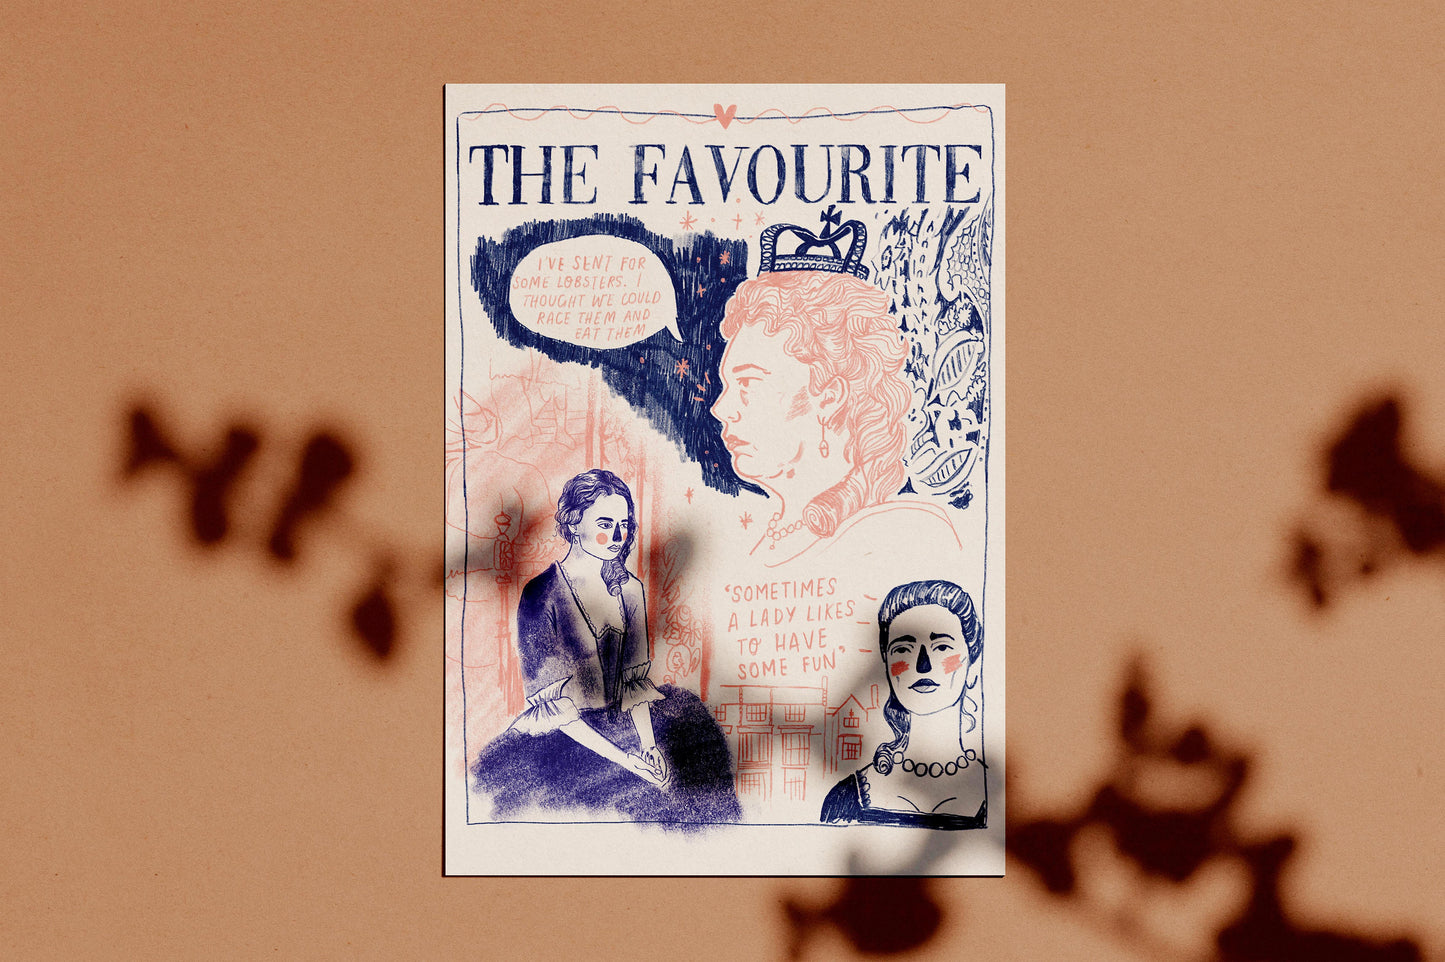 The Favourite a4 print